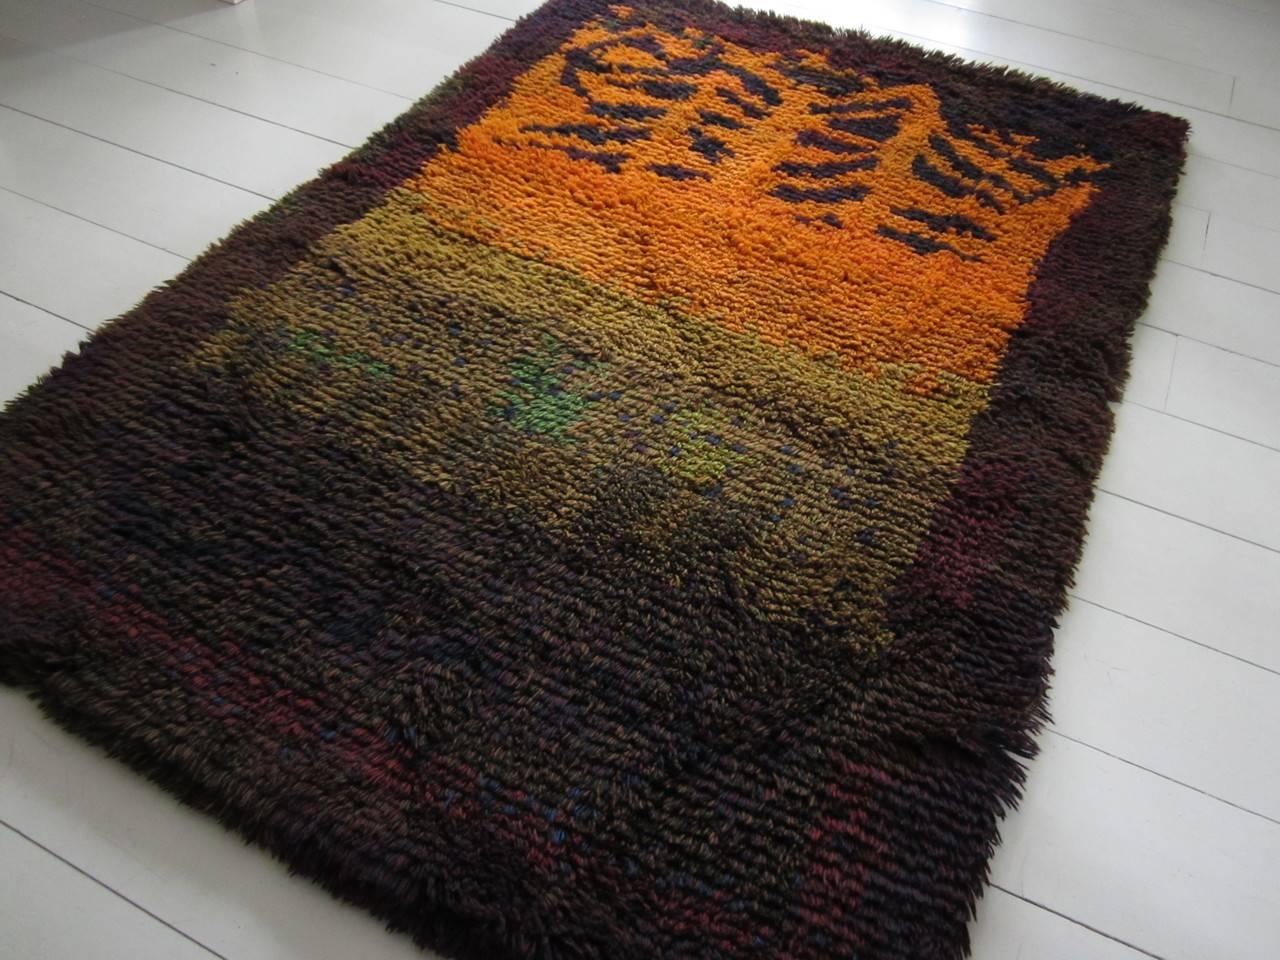 A rare Rya rug from a Finnish textile designer Ritva Puotila, Auringonlasku (Sunset). Designed in 1963 for Friends of Finnish Handicrafts, the leading rug house in Finland.

Friends of Handicrafts was the company, which hired the top designers,